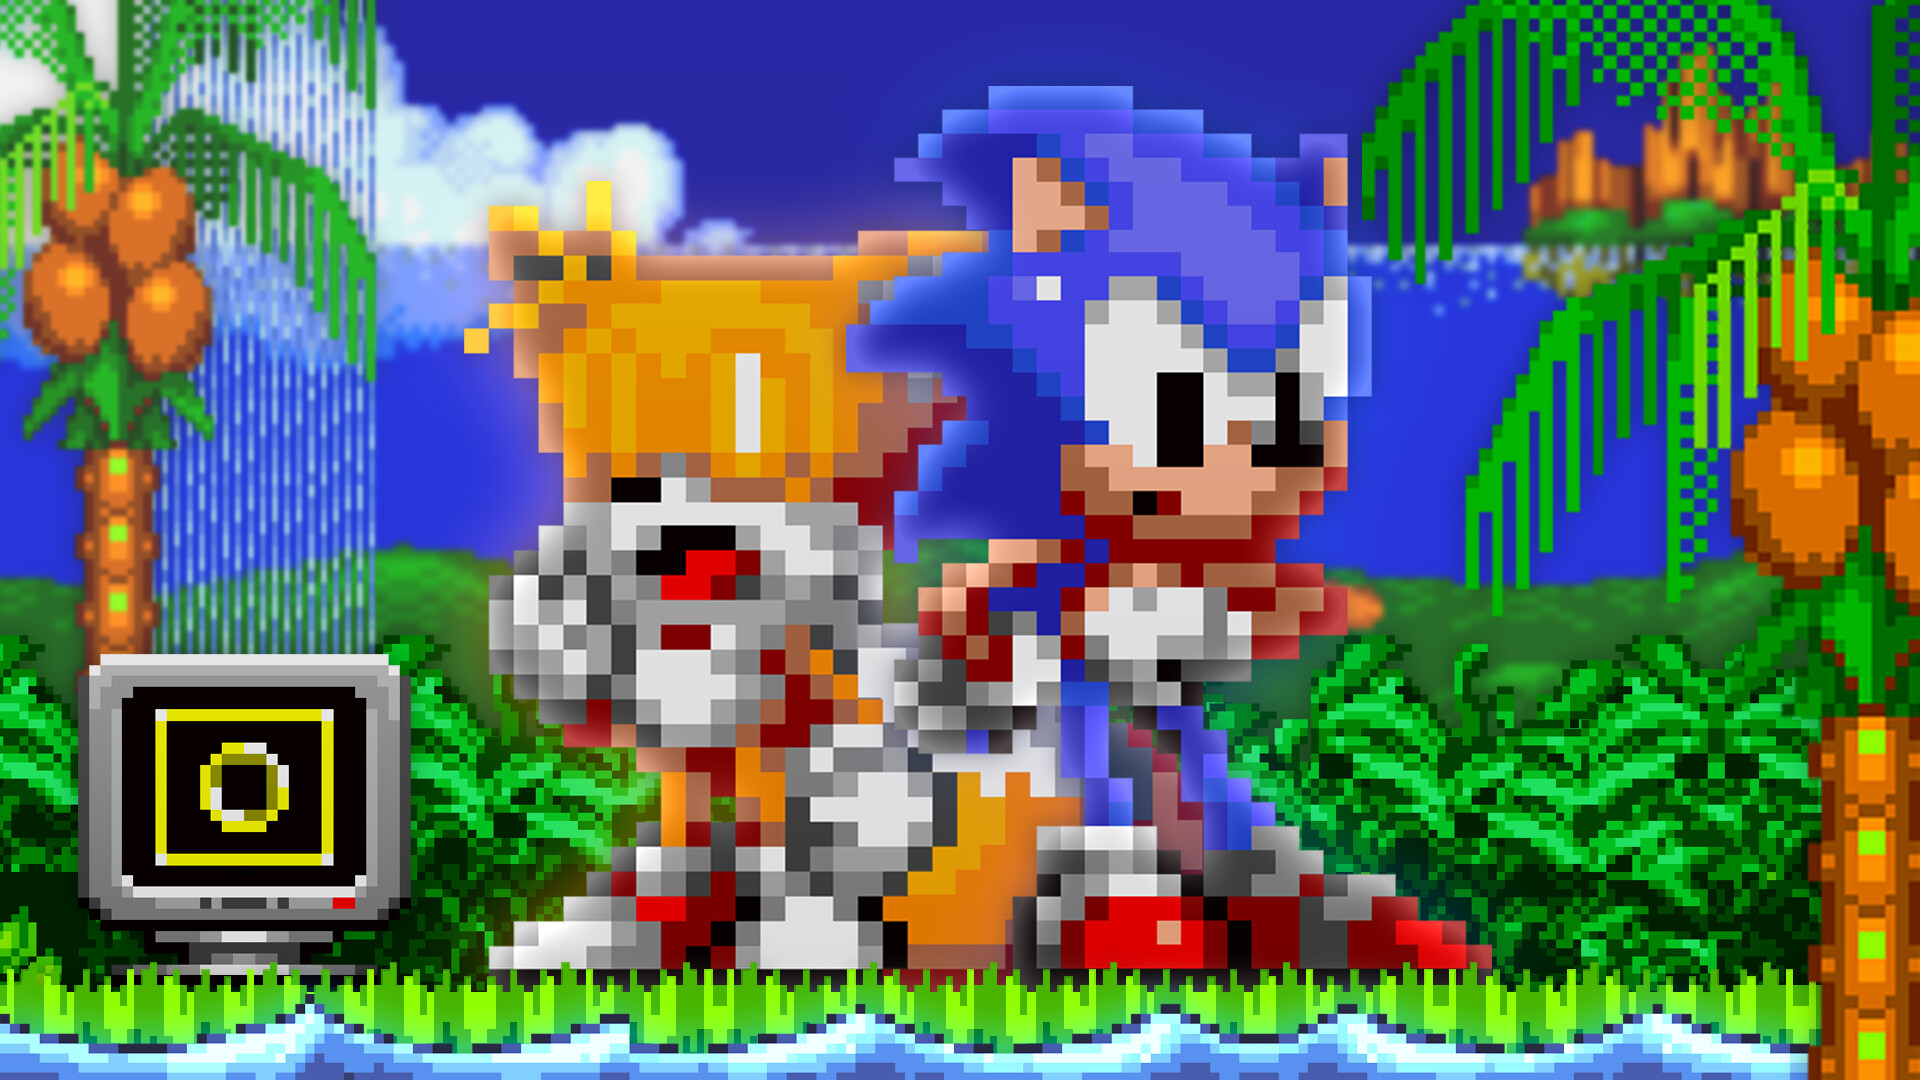 Kanomi13 on Game Jolt: Some meh metal sonic sprites. They are not finished  at all / Alguno